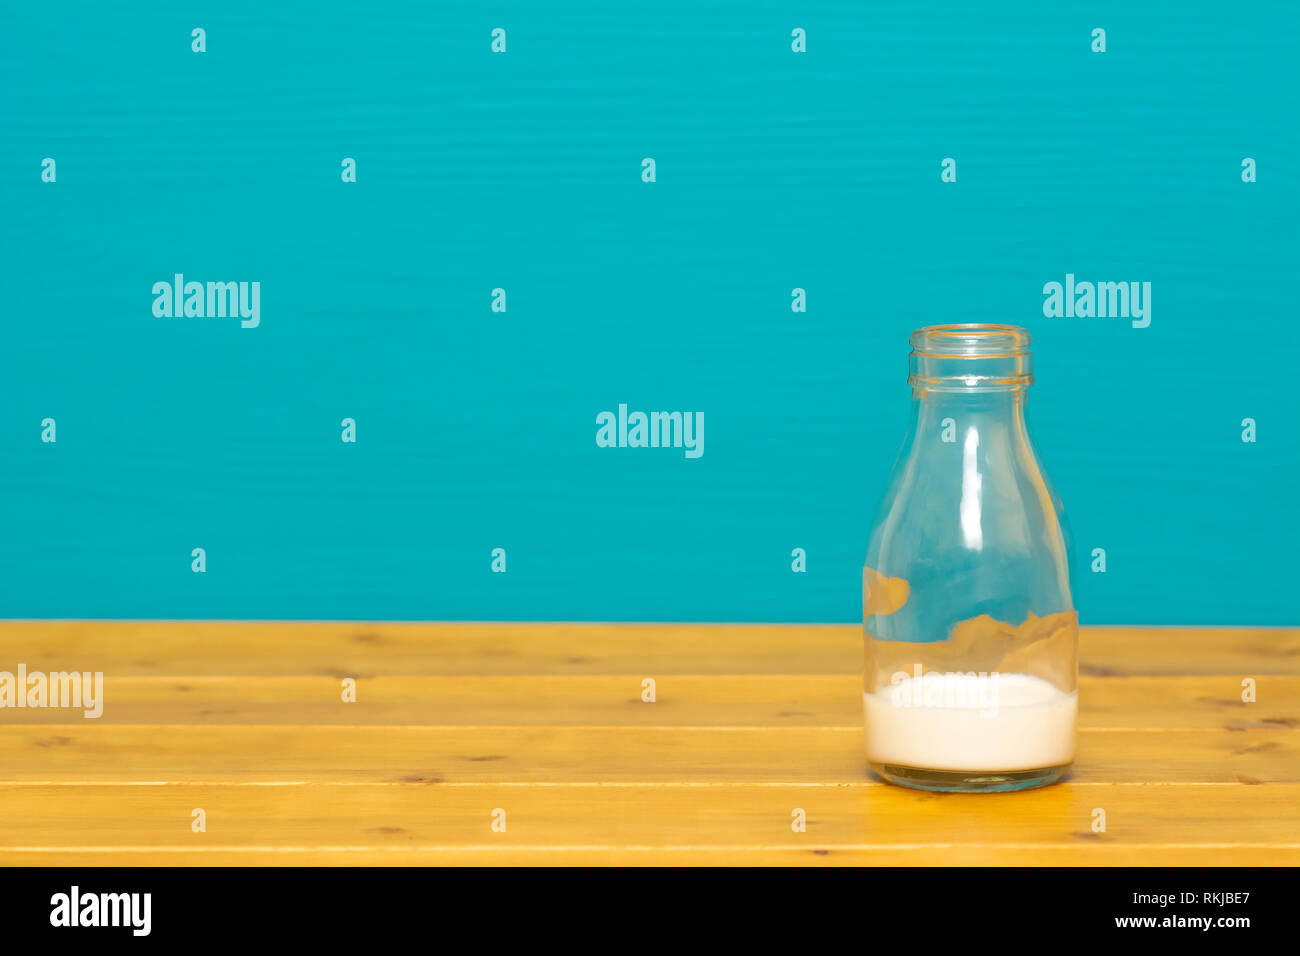 https://c8.alamy.com/comp/RKJBE7/one-third-pint-glass-milk-bottle-with-dregs-of-fresh-creamy-milk-on-a-wooden-table-against-a-bright-teal-painted-background-RKJBE7.jpg